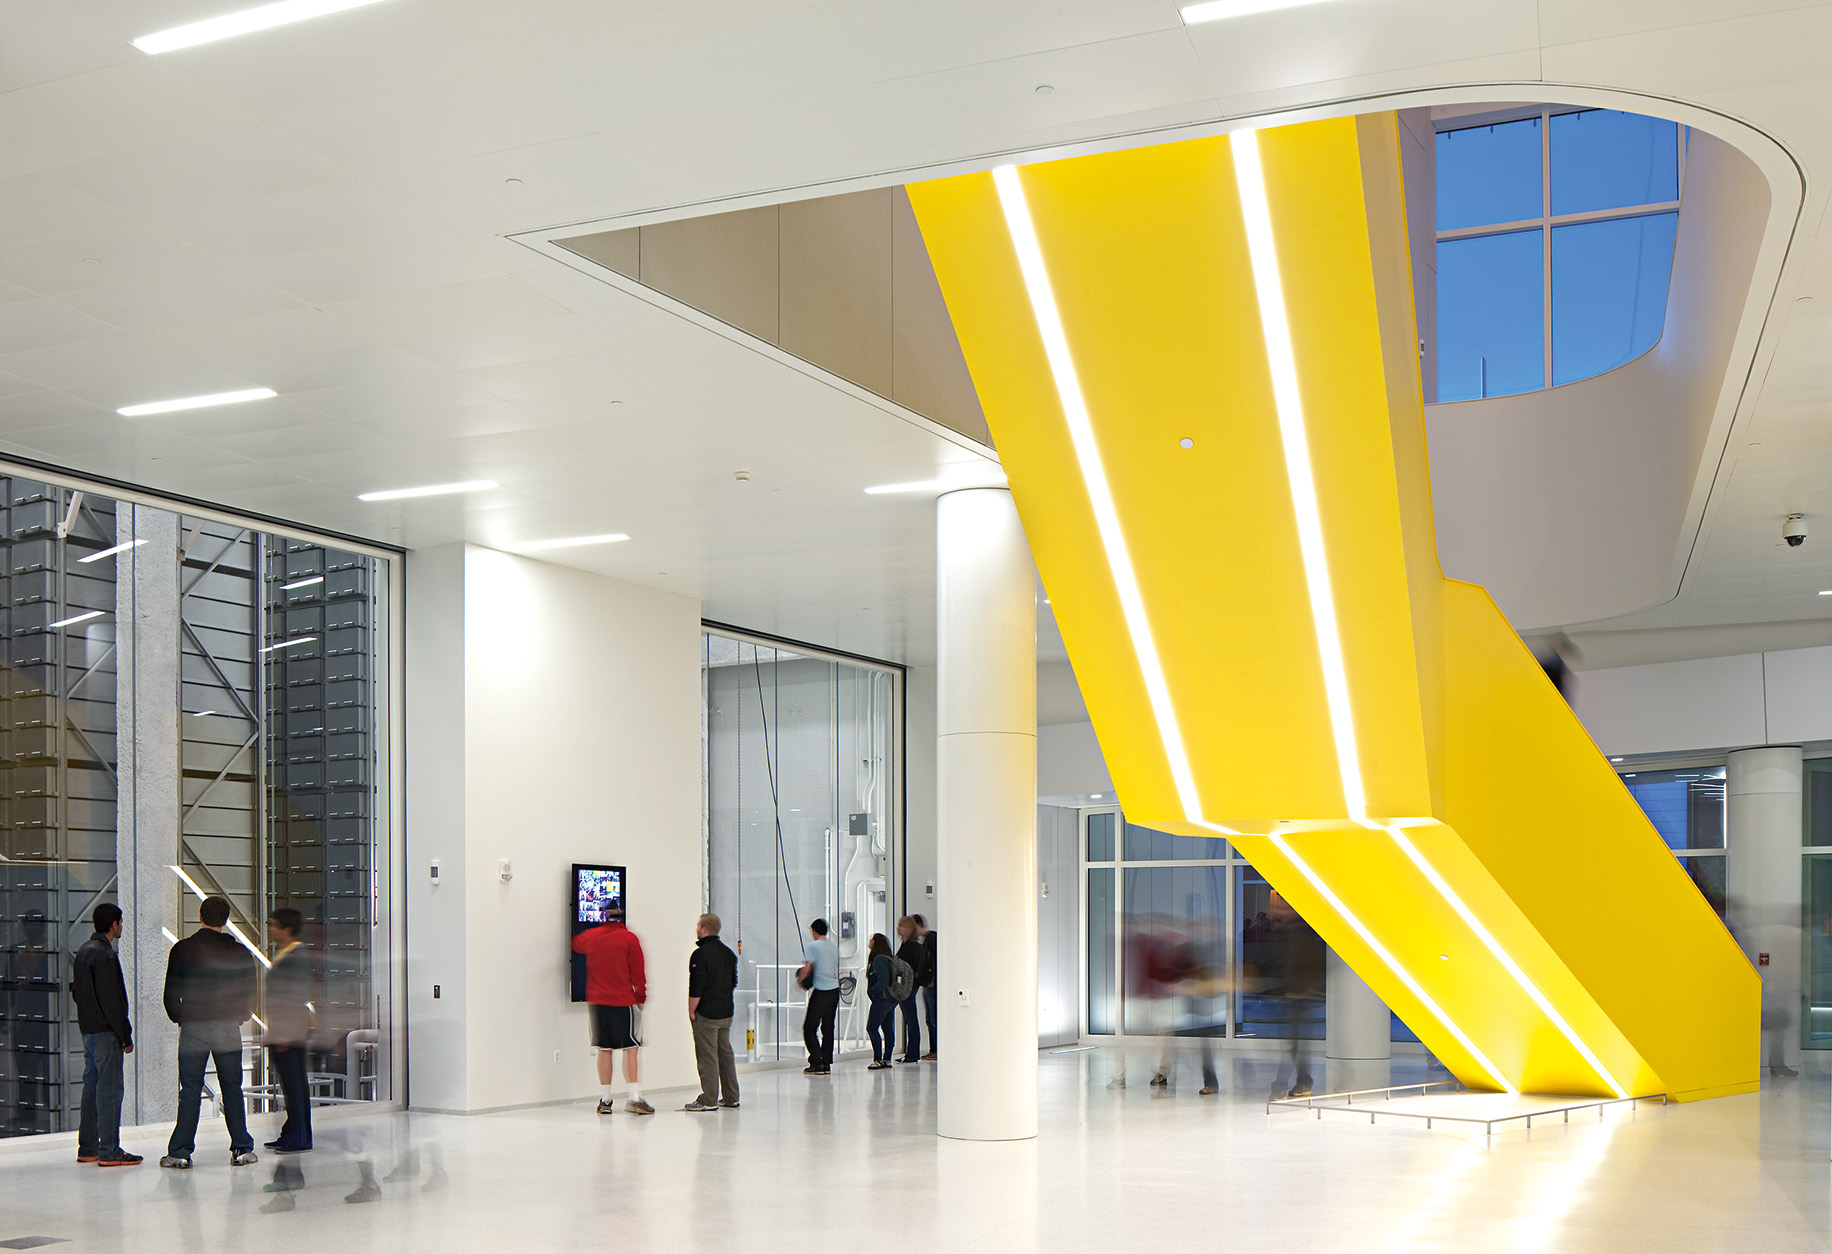 The staircase of the James B. Hunt Library, North Carolina State University. Snøhetta, 2013.  
The stair is yellow and placed right along the main sight- and circulation lines to encourage users.